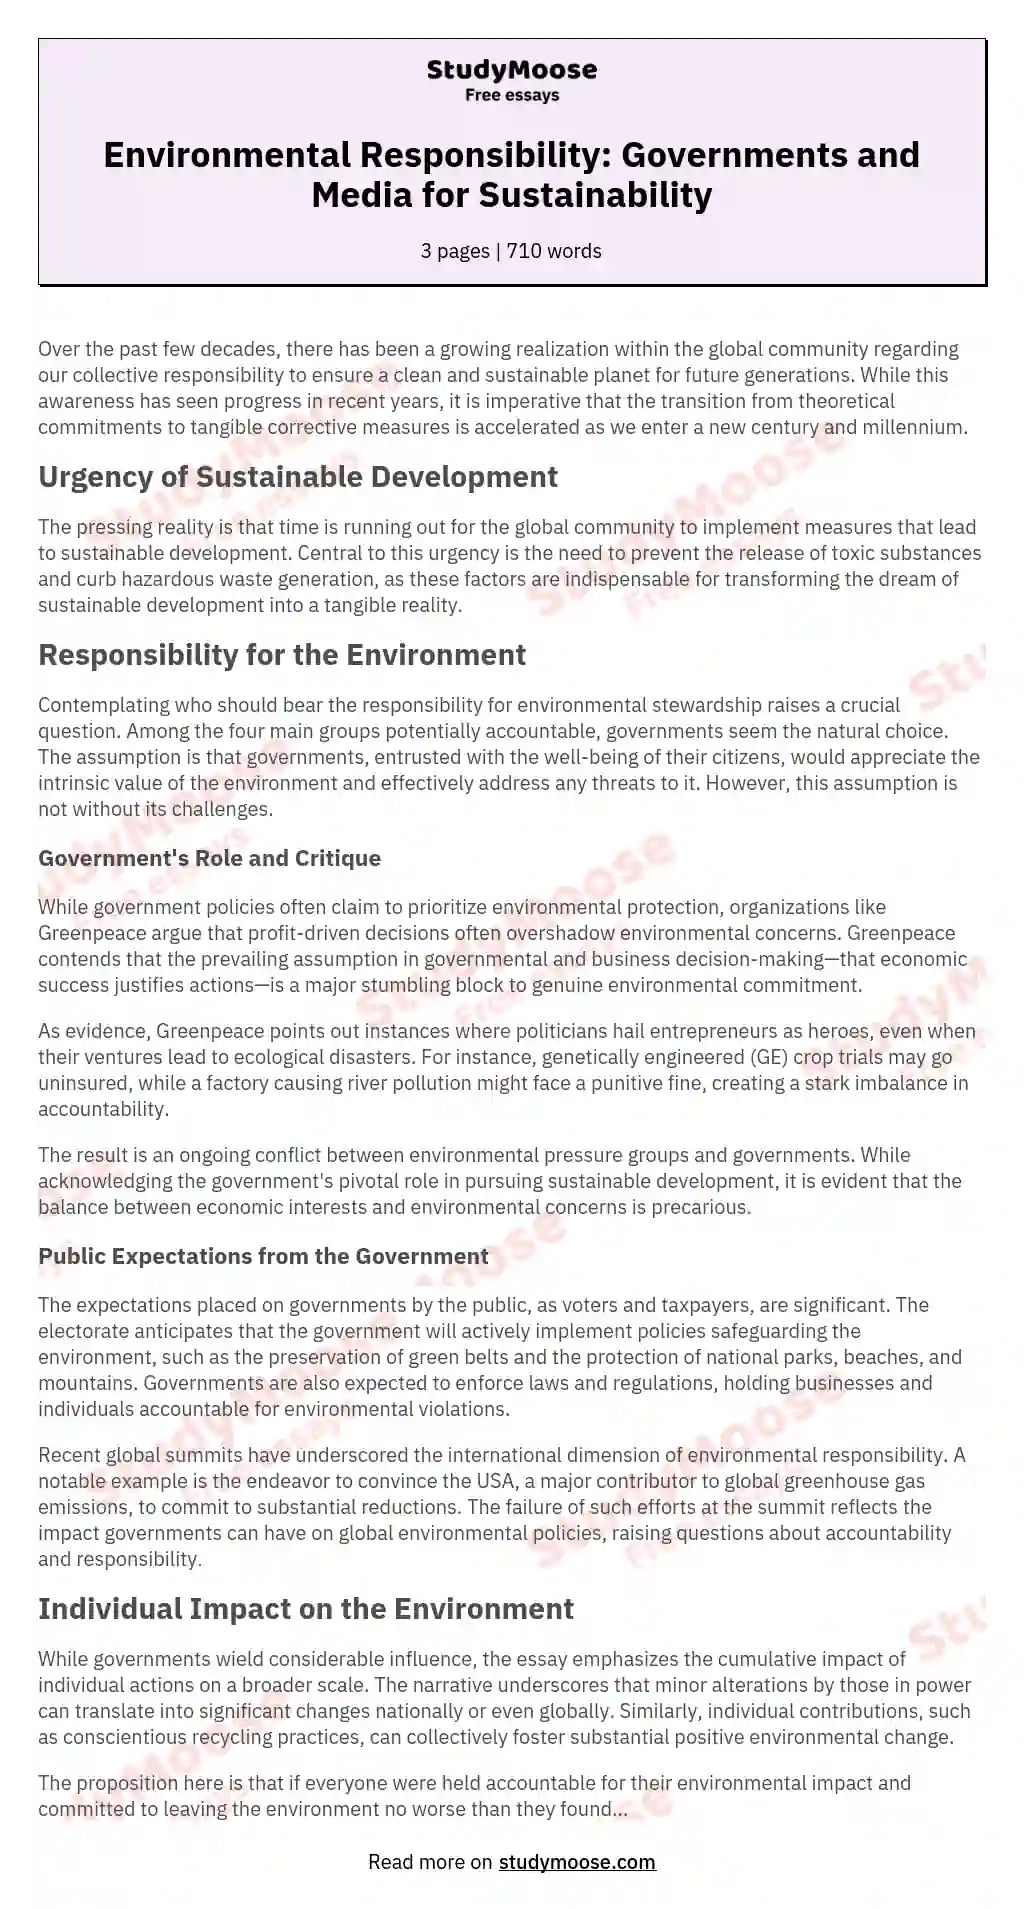 Environmental Responsibility: Governments and Media for Sustainability essay